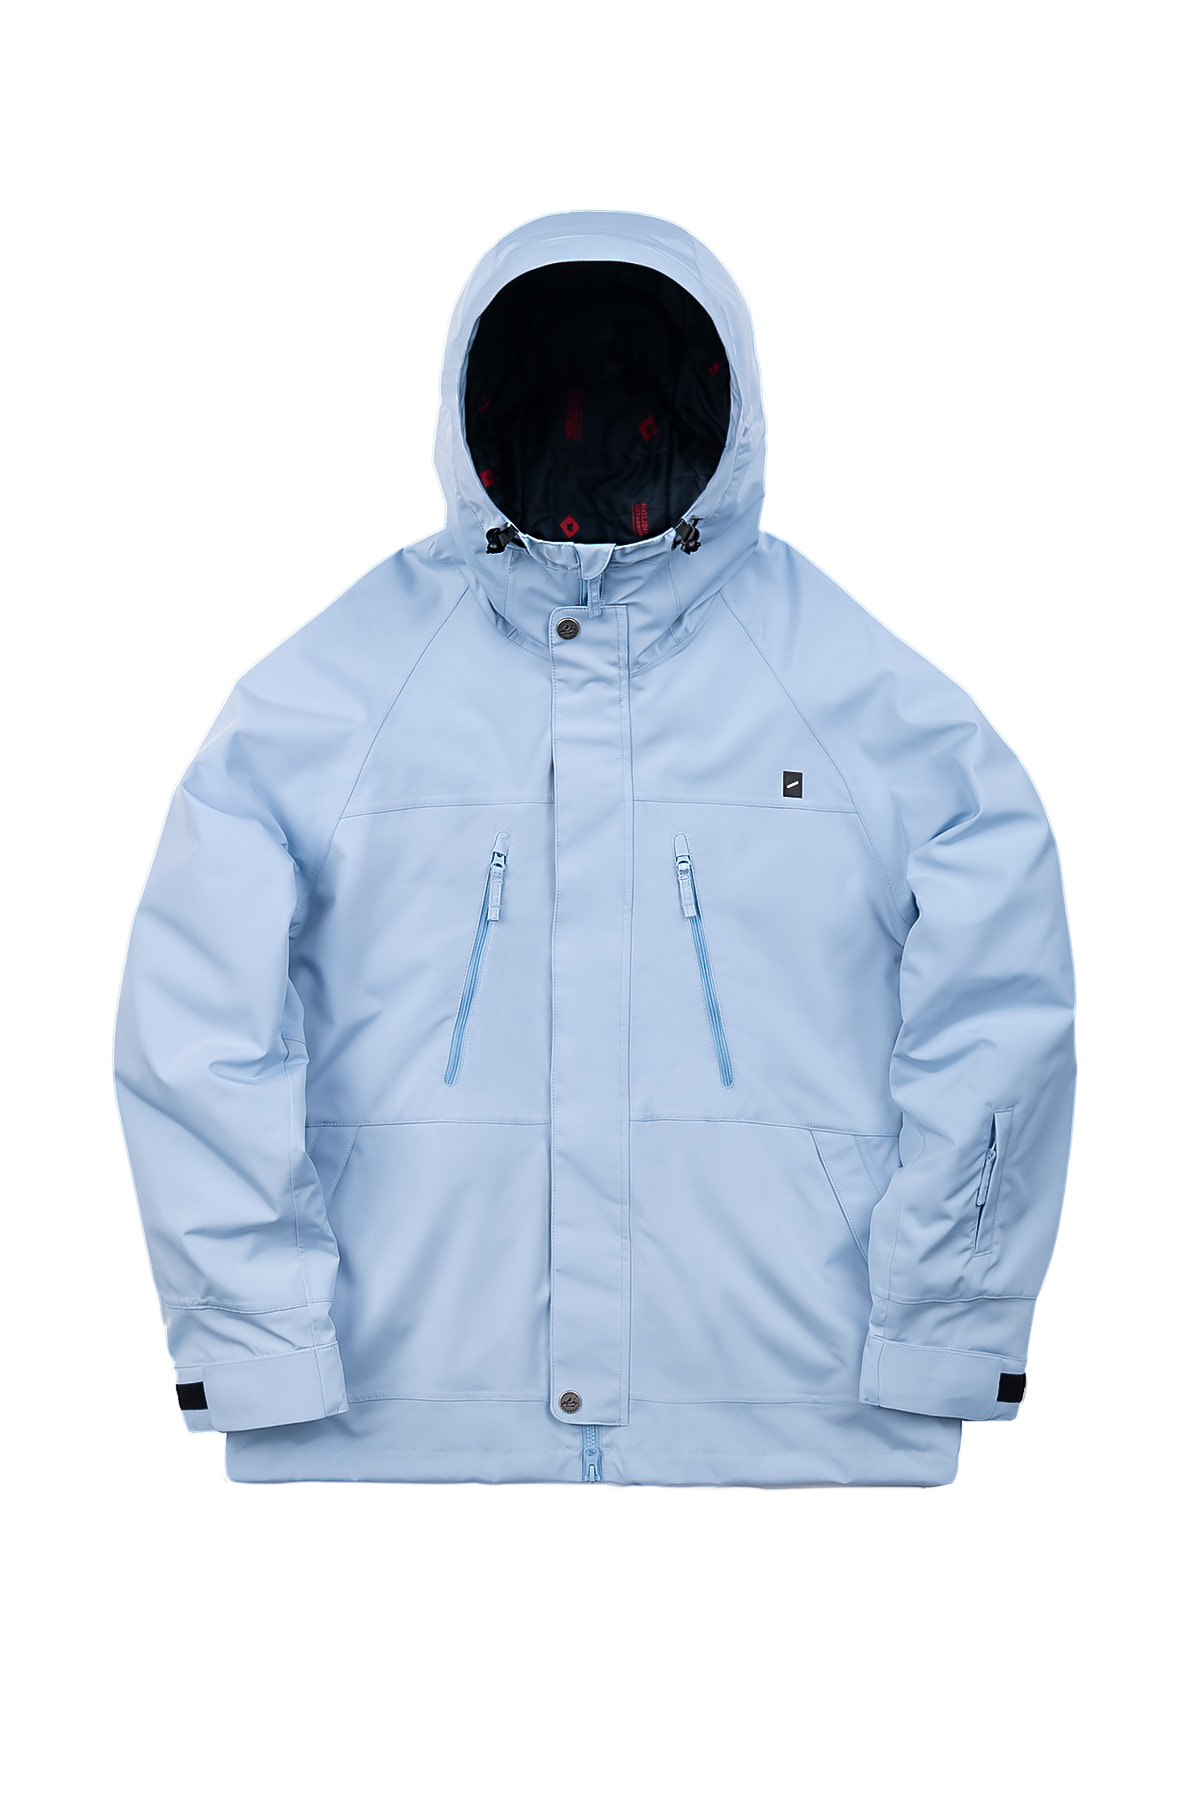 ULTIMA 2L JACKET[2layer]-POWDER BLUEHOLIDAY OUTERWEAR